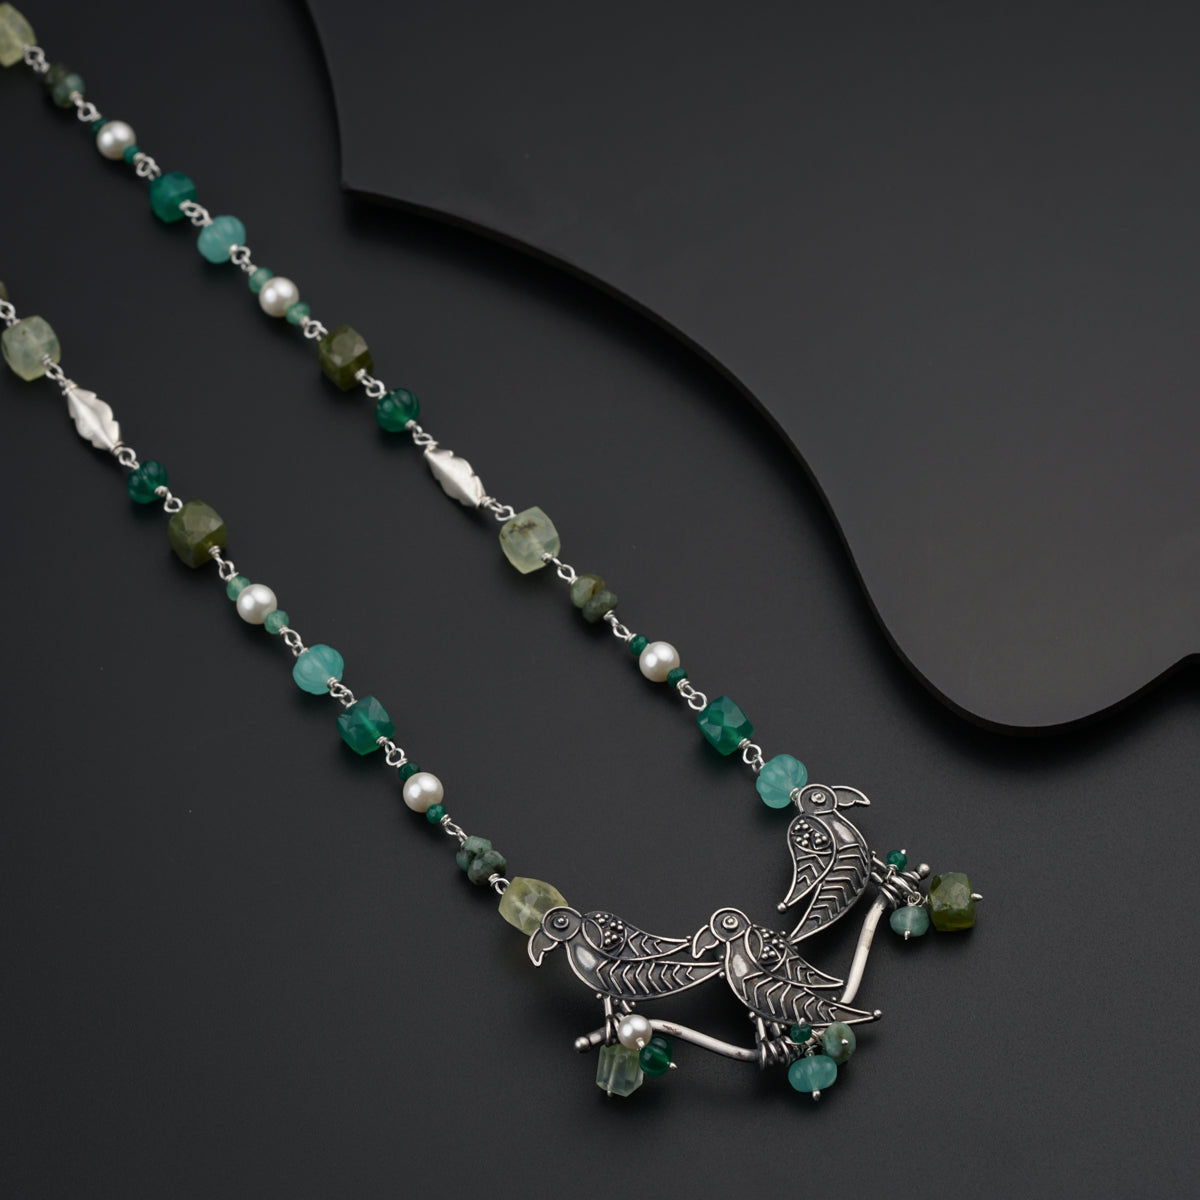 a necklace with green beads and a bird on it